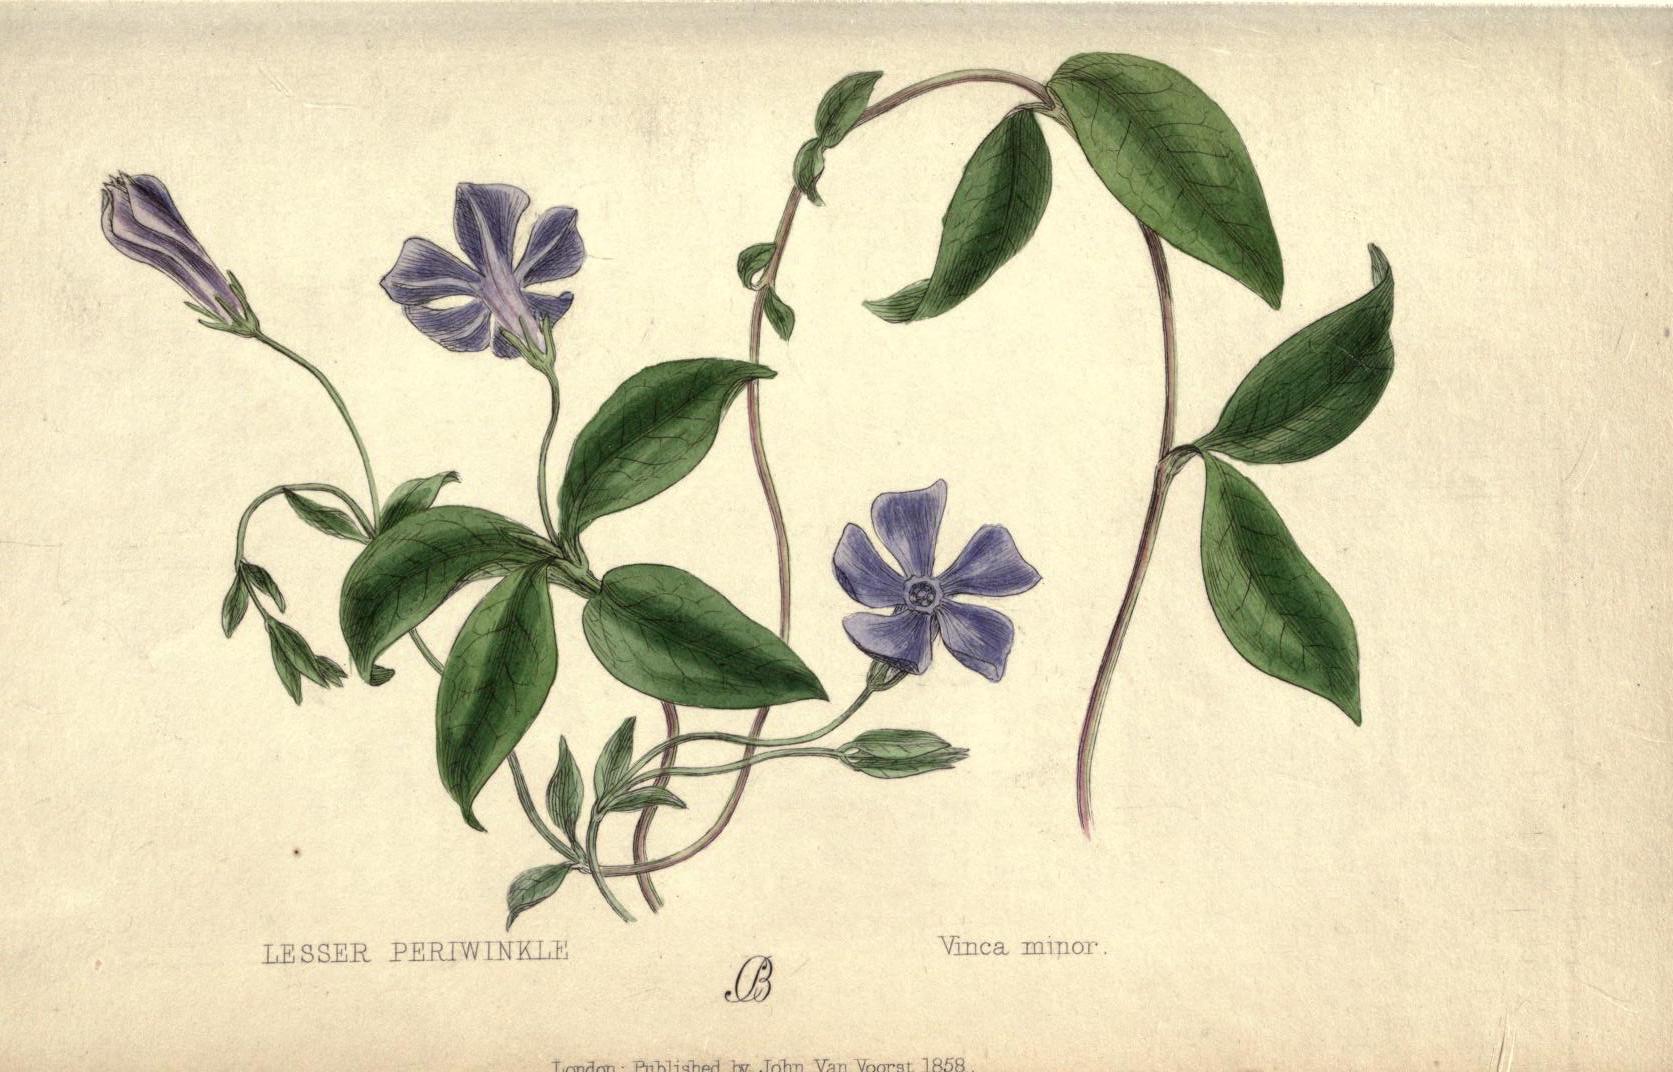 the paris review - periwinkle, the color of poison, modernism, and